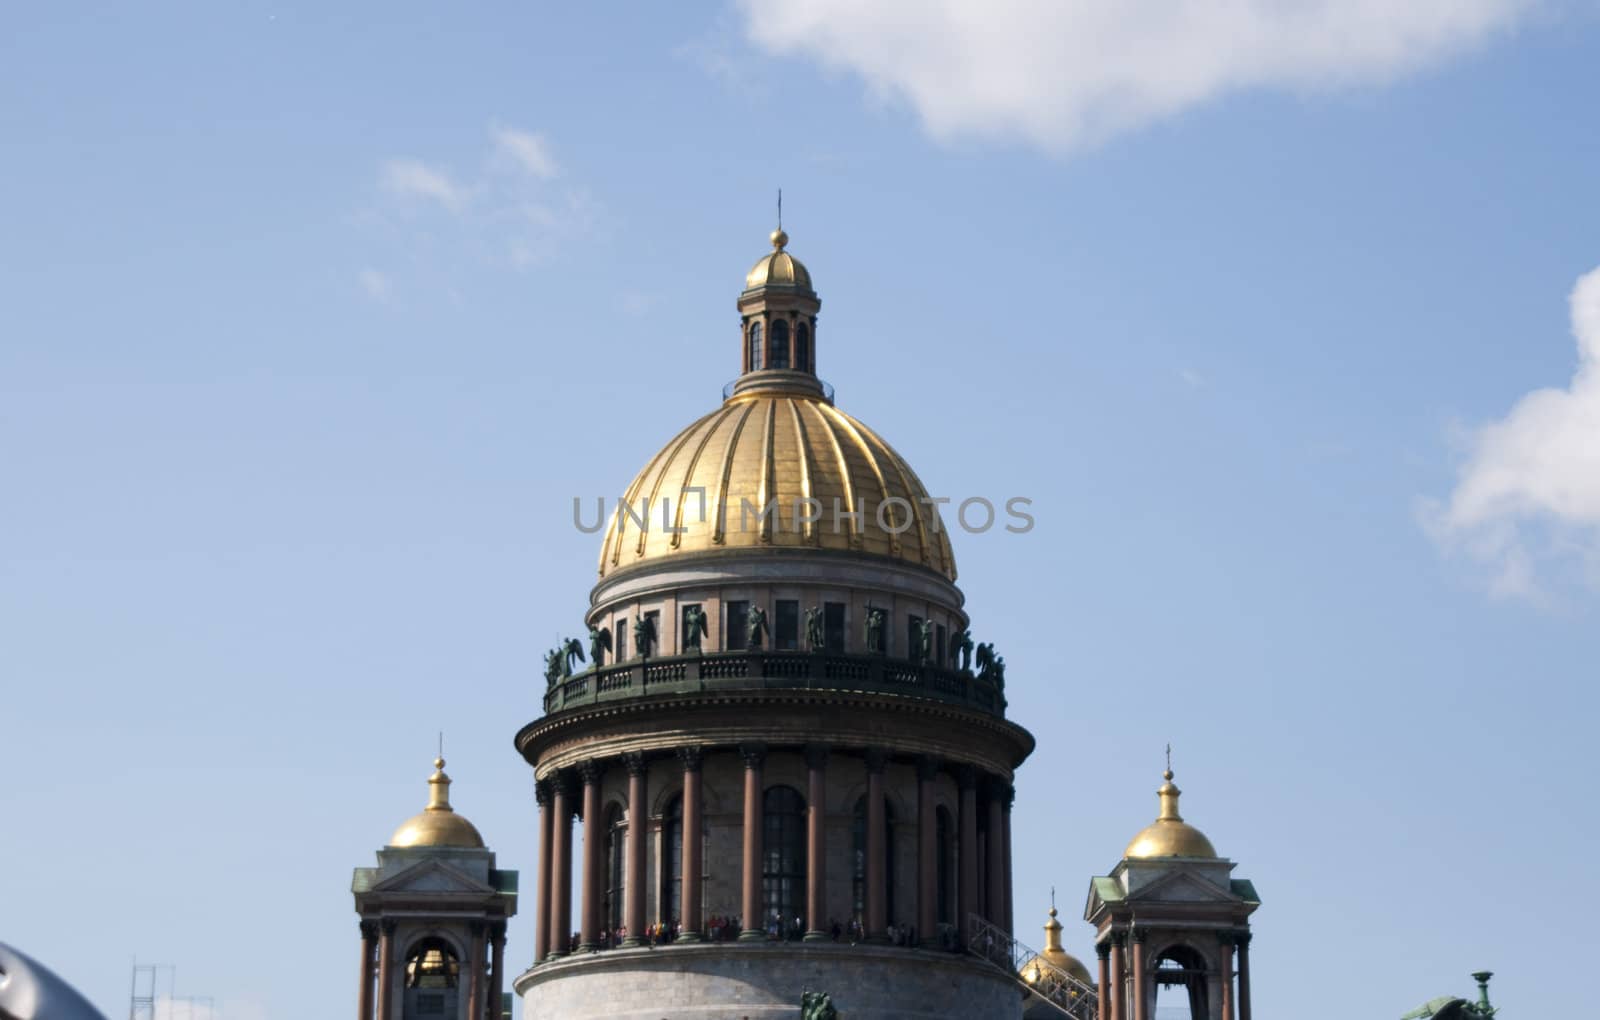 Architecture of Petersburg. Travel on an ancient city. High resolution image.